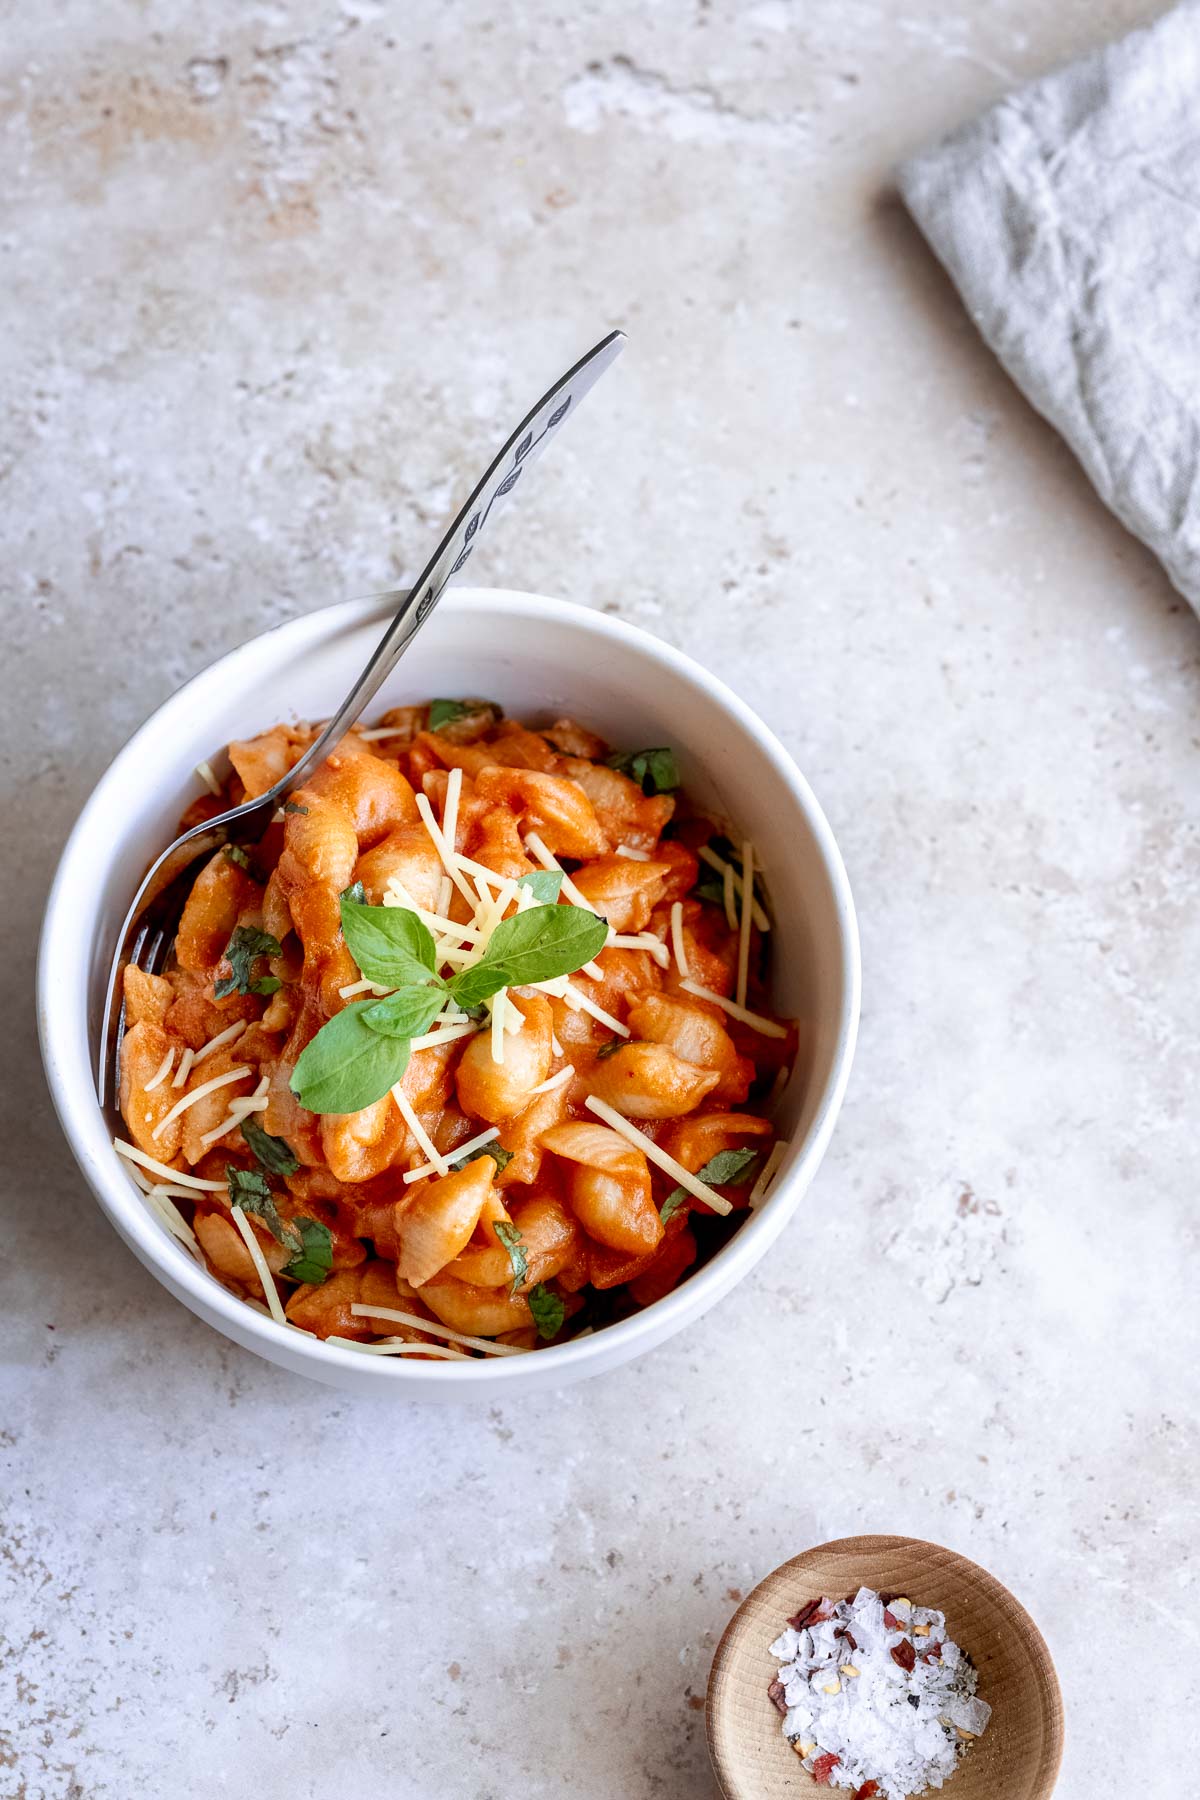 spicy gigi hadid pasta recipe made with shell pasta, tomato paste, heavy cream, red chili flakes and garnished with basil and cheese.